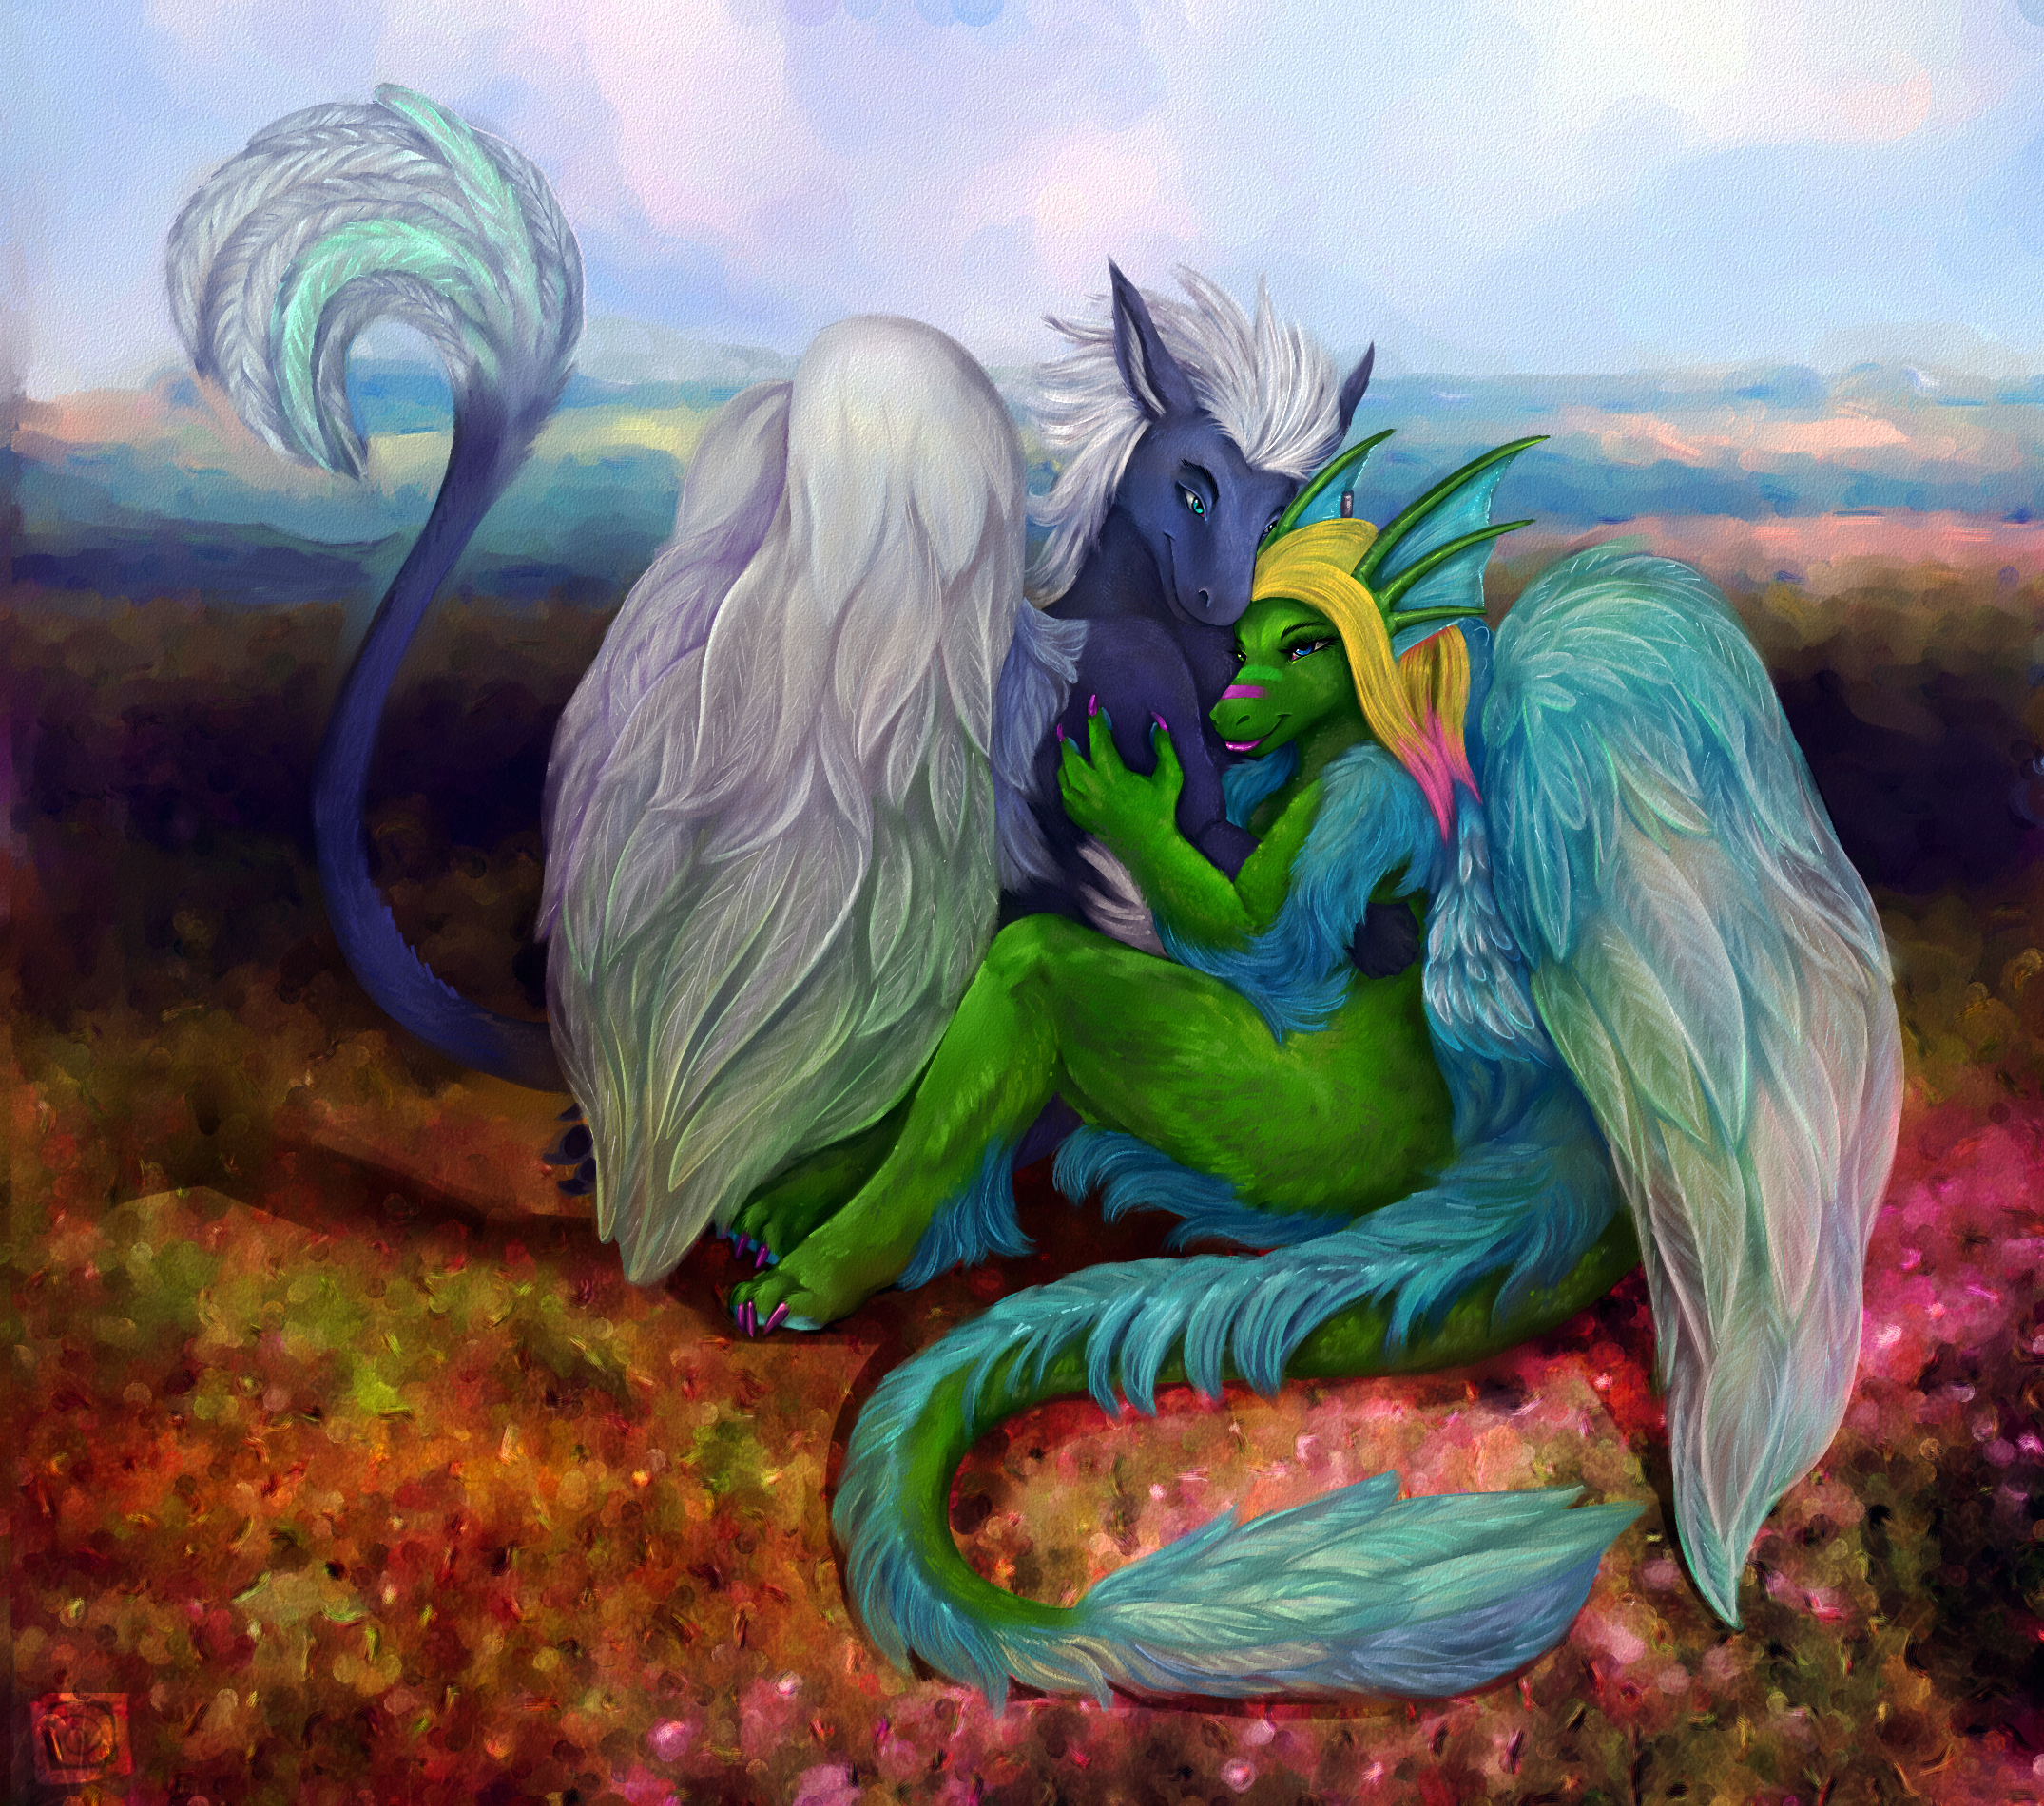 fatally_attracted_by_celestialsunberry-d75acwb.png